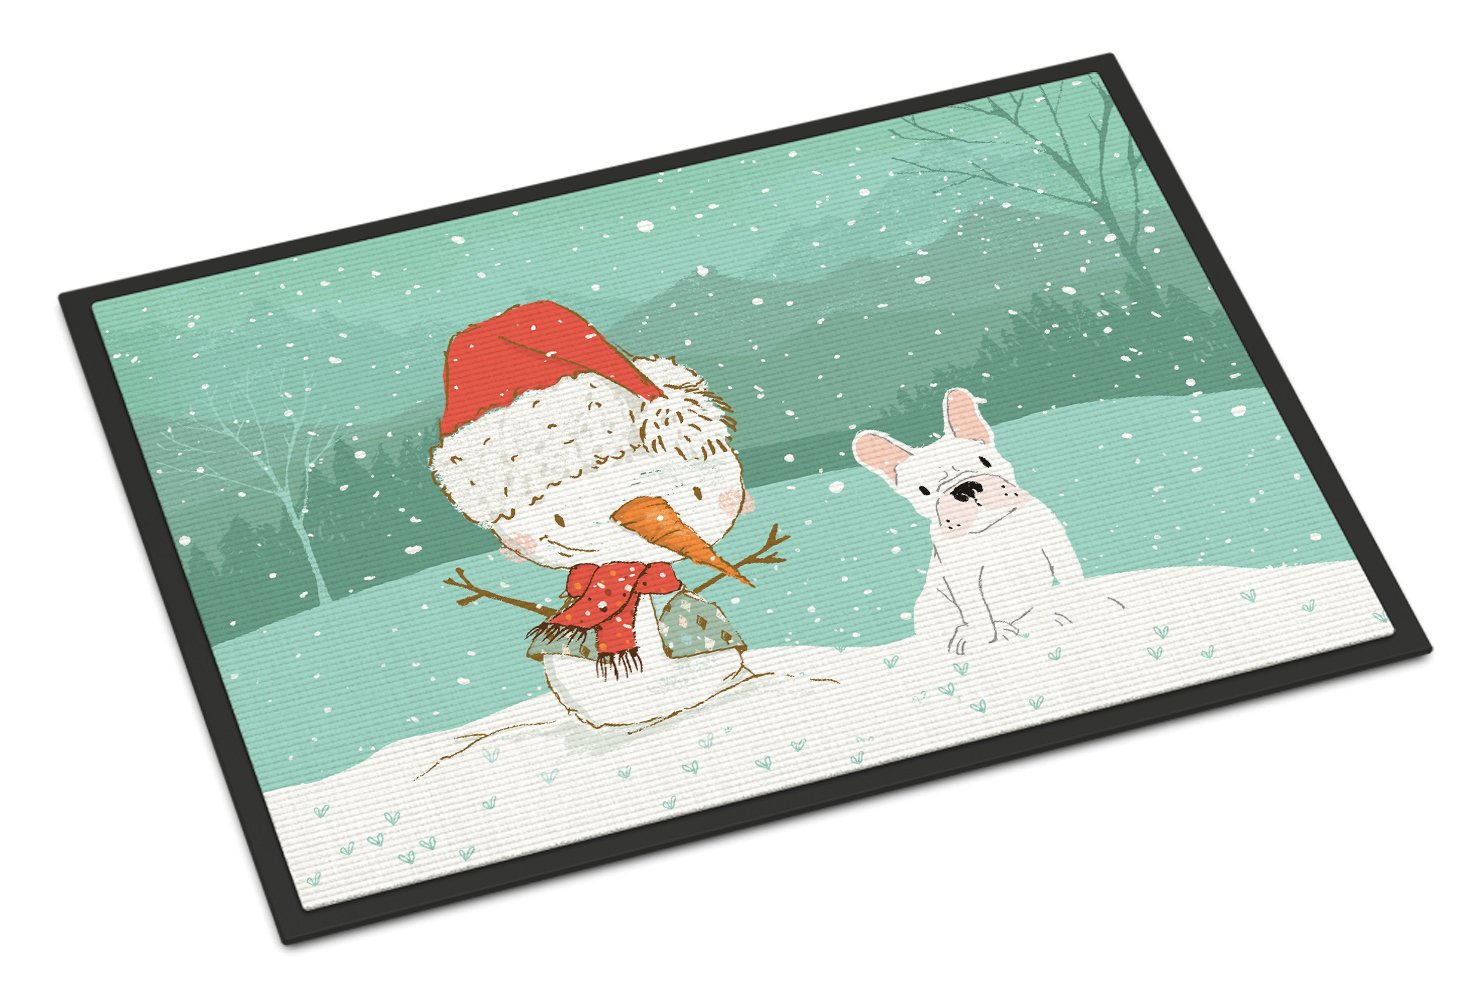 White French Bulldog Snowman Christmas Indoor or Outdoor Mat 24x36 CK2088JMAT by Caroline's Treasures